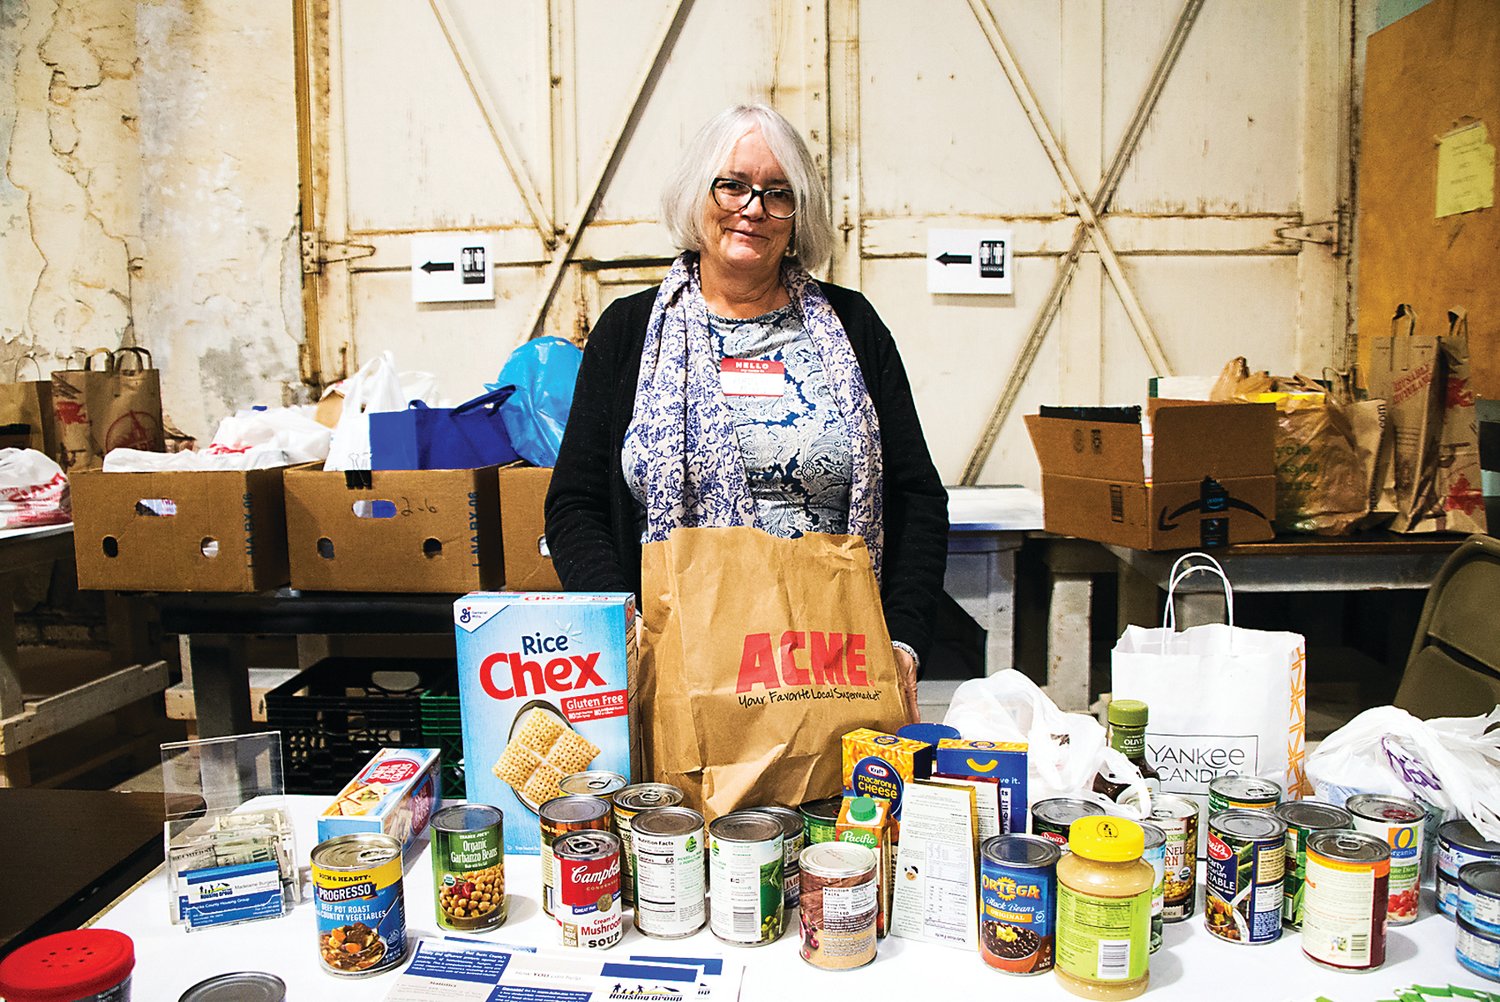 Maddie Burgess, Bucks County Housing Group community food pantry manager, accepts the donations of the attendees of Locavore. More than 2,000 pounds of food was donated to the Bucks County Housing Group based in Warminster. Photograph by Chiara Chandoha.